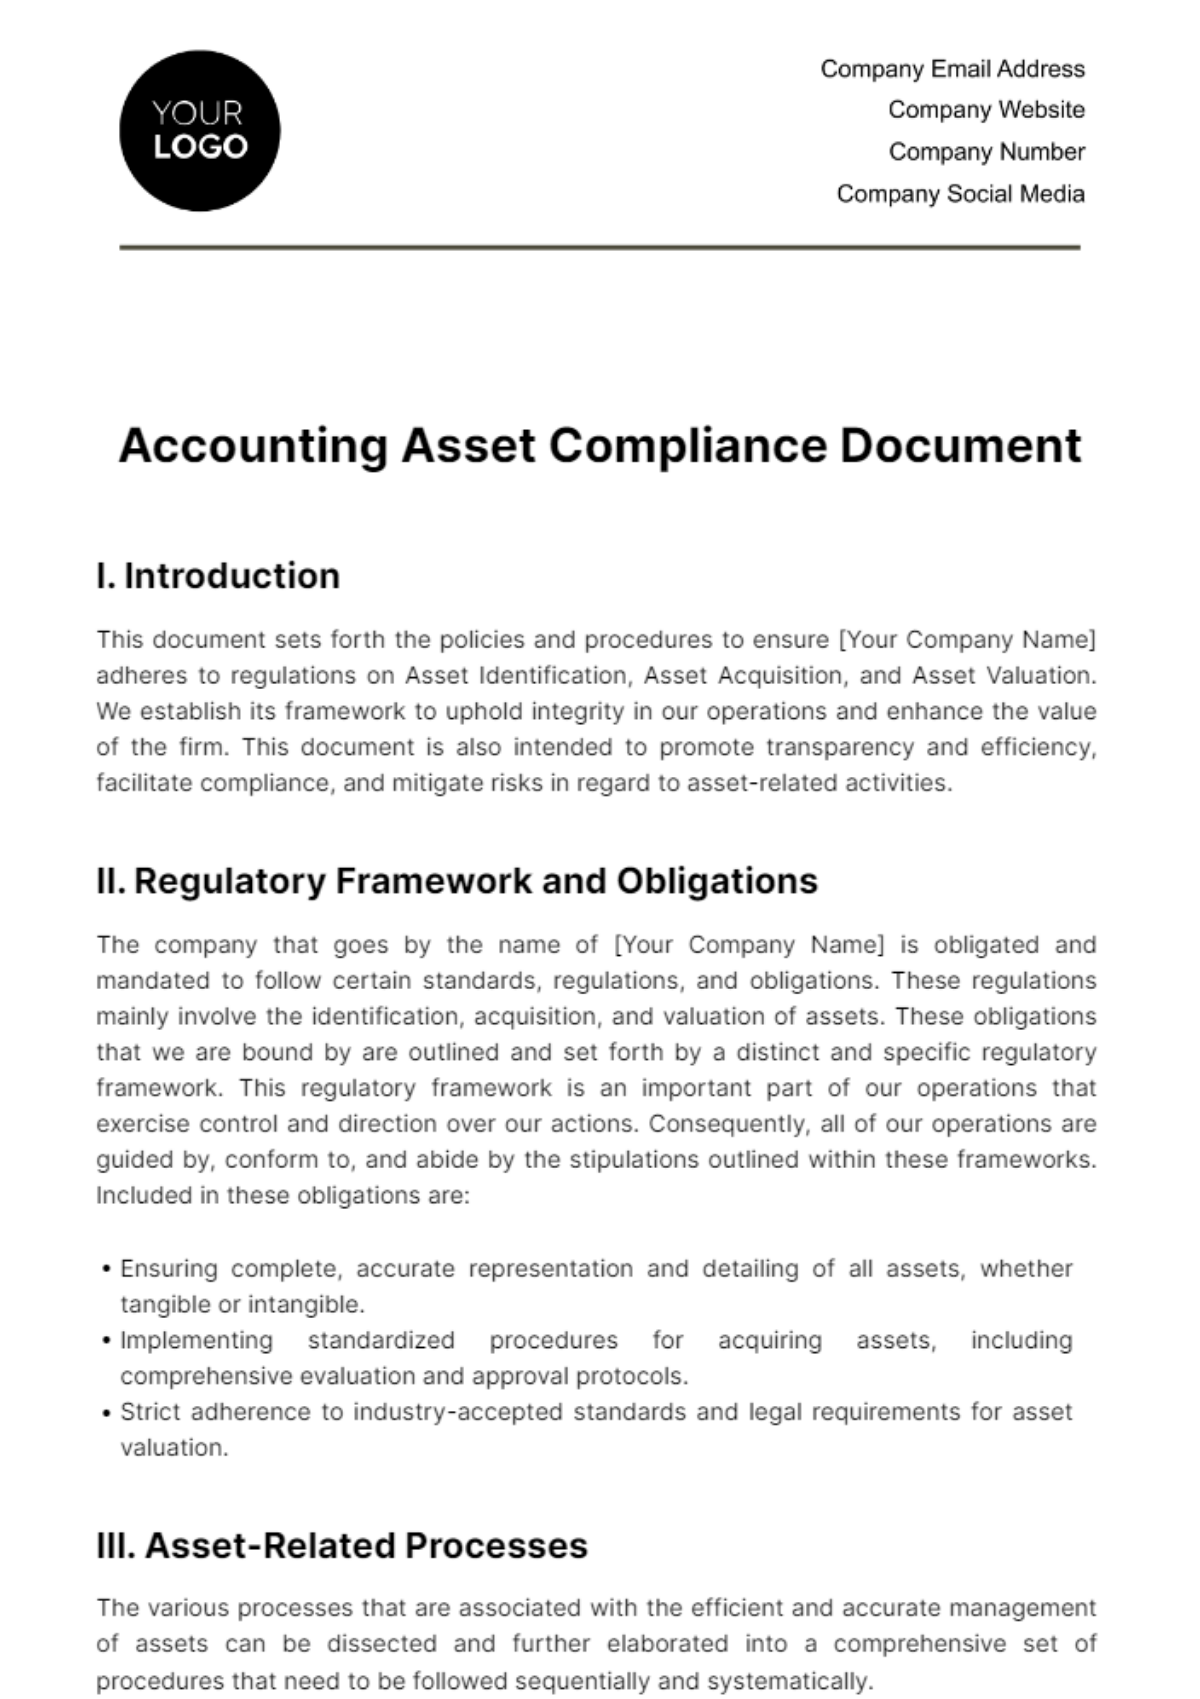 Accounting Asset Compliance Document Template